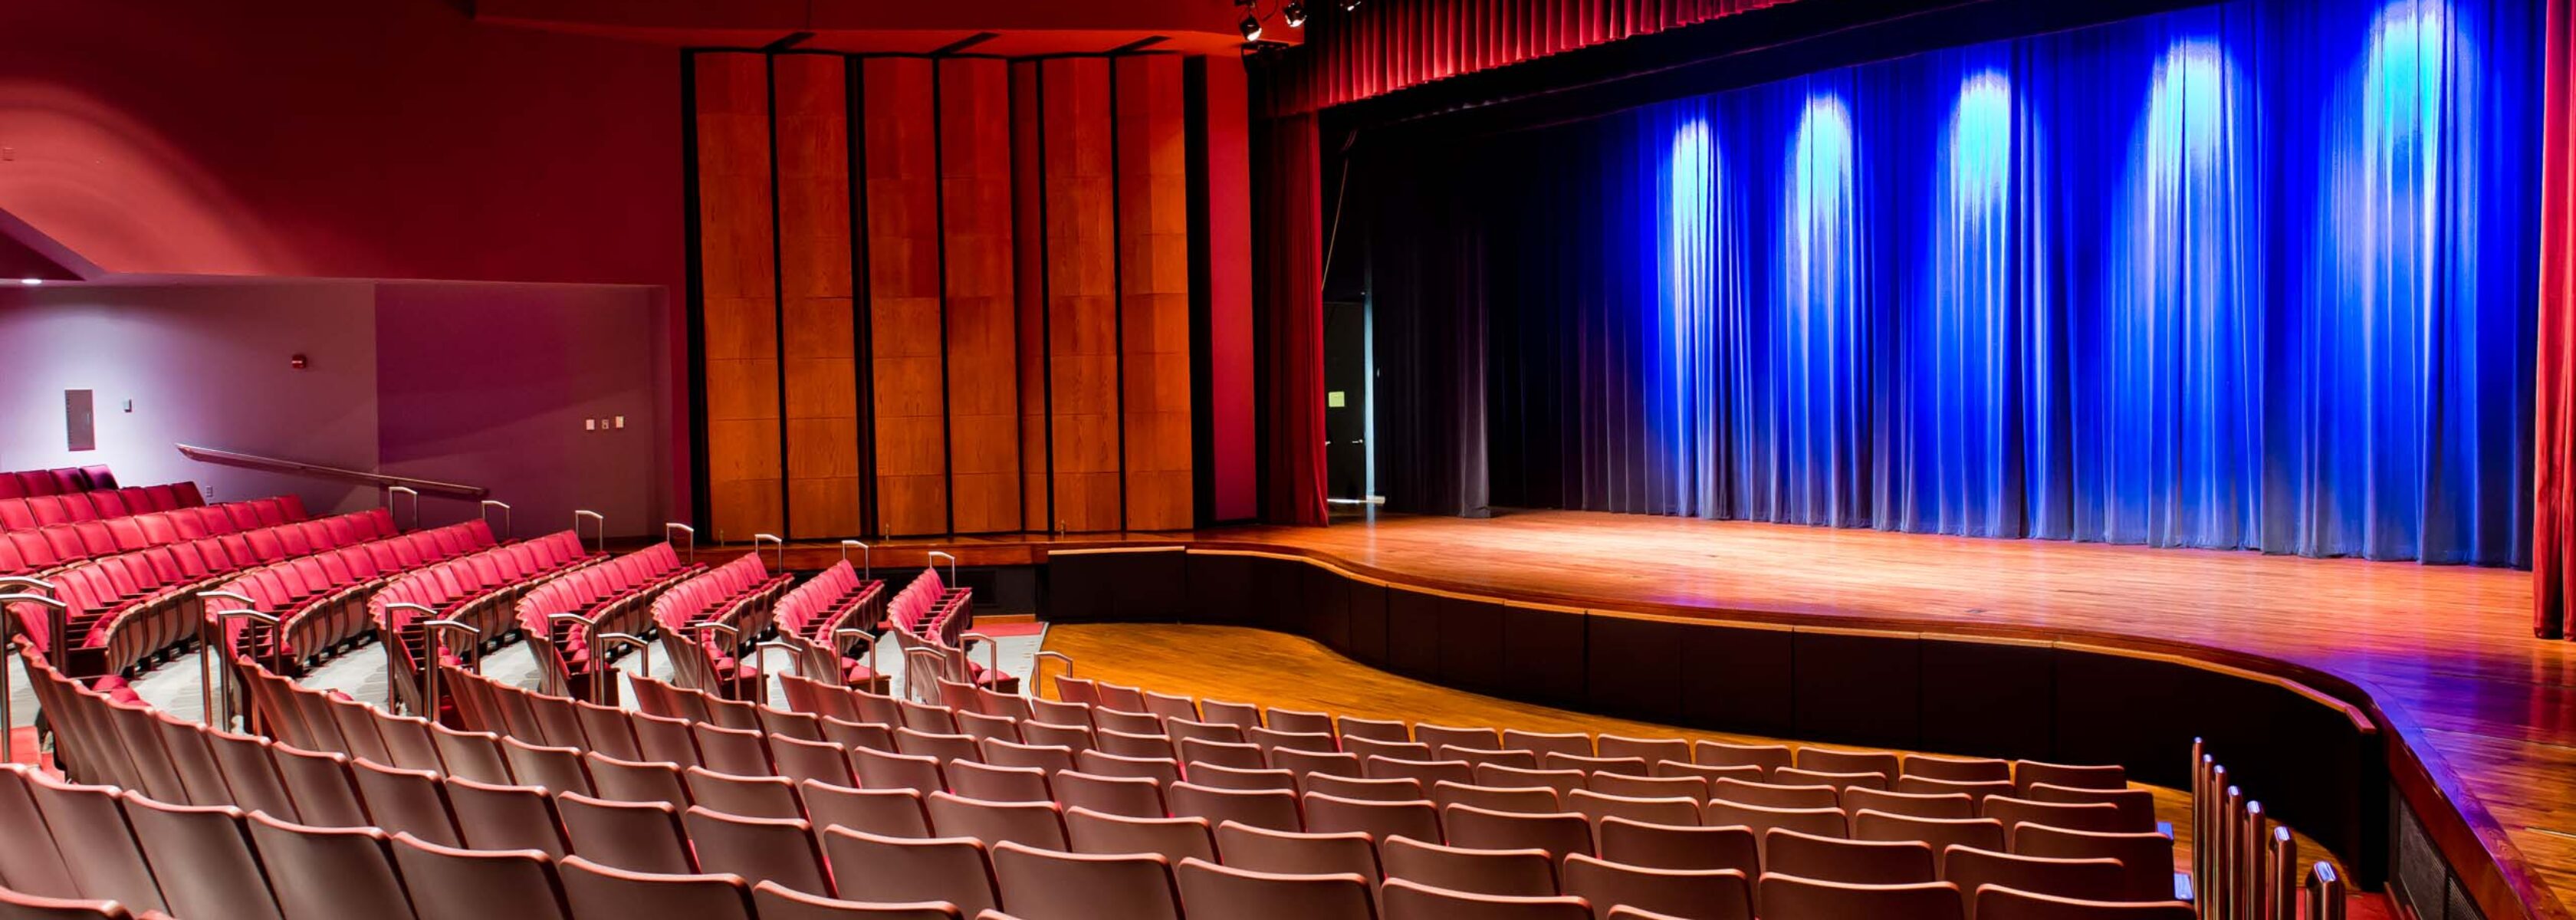 gordon center stage and seating.